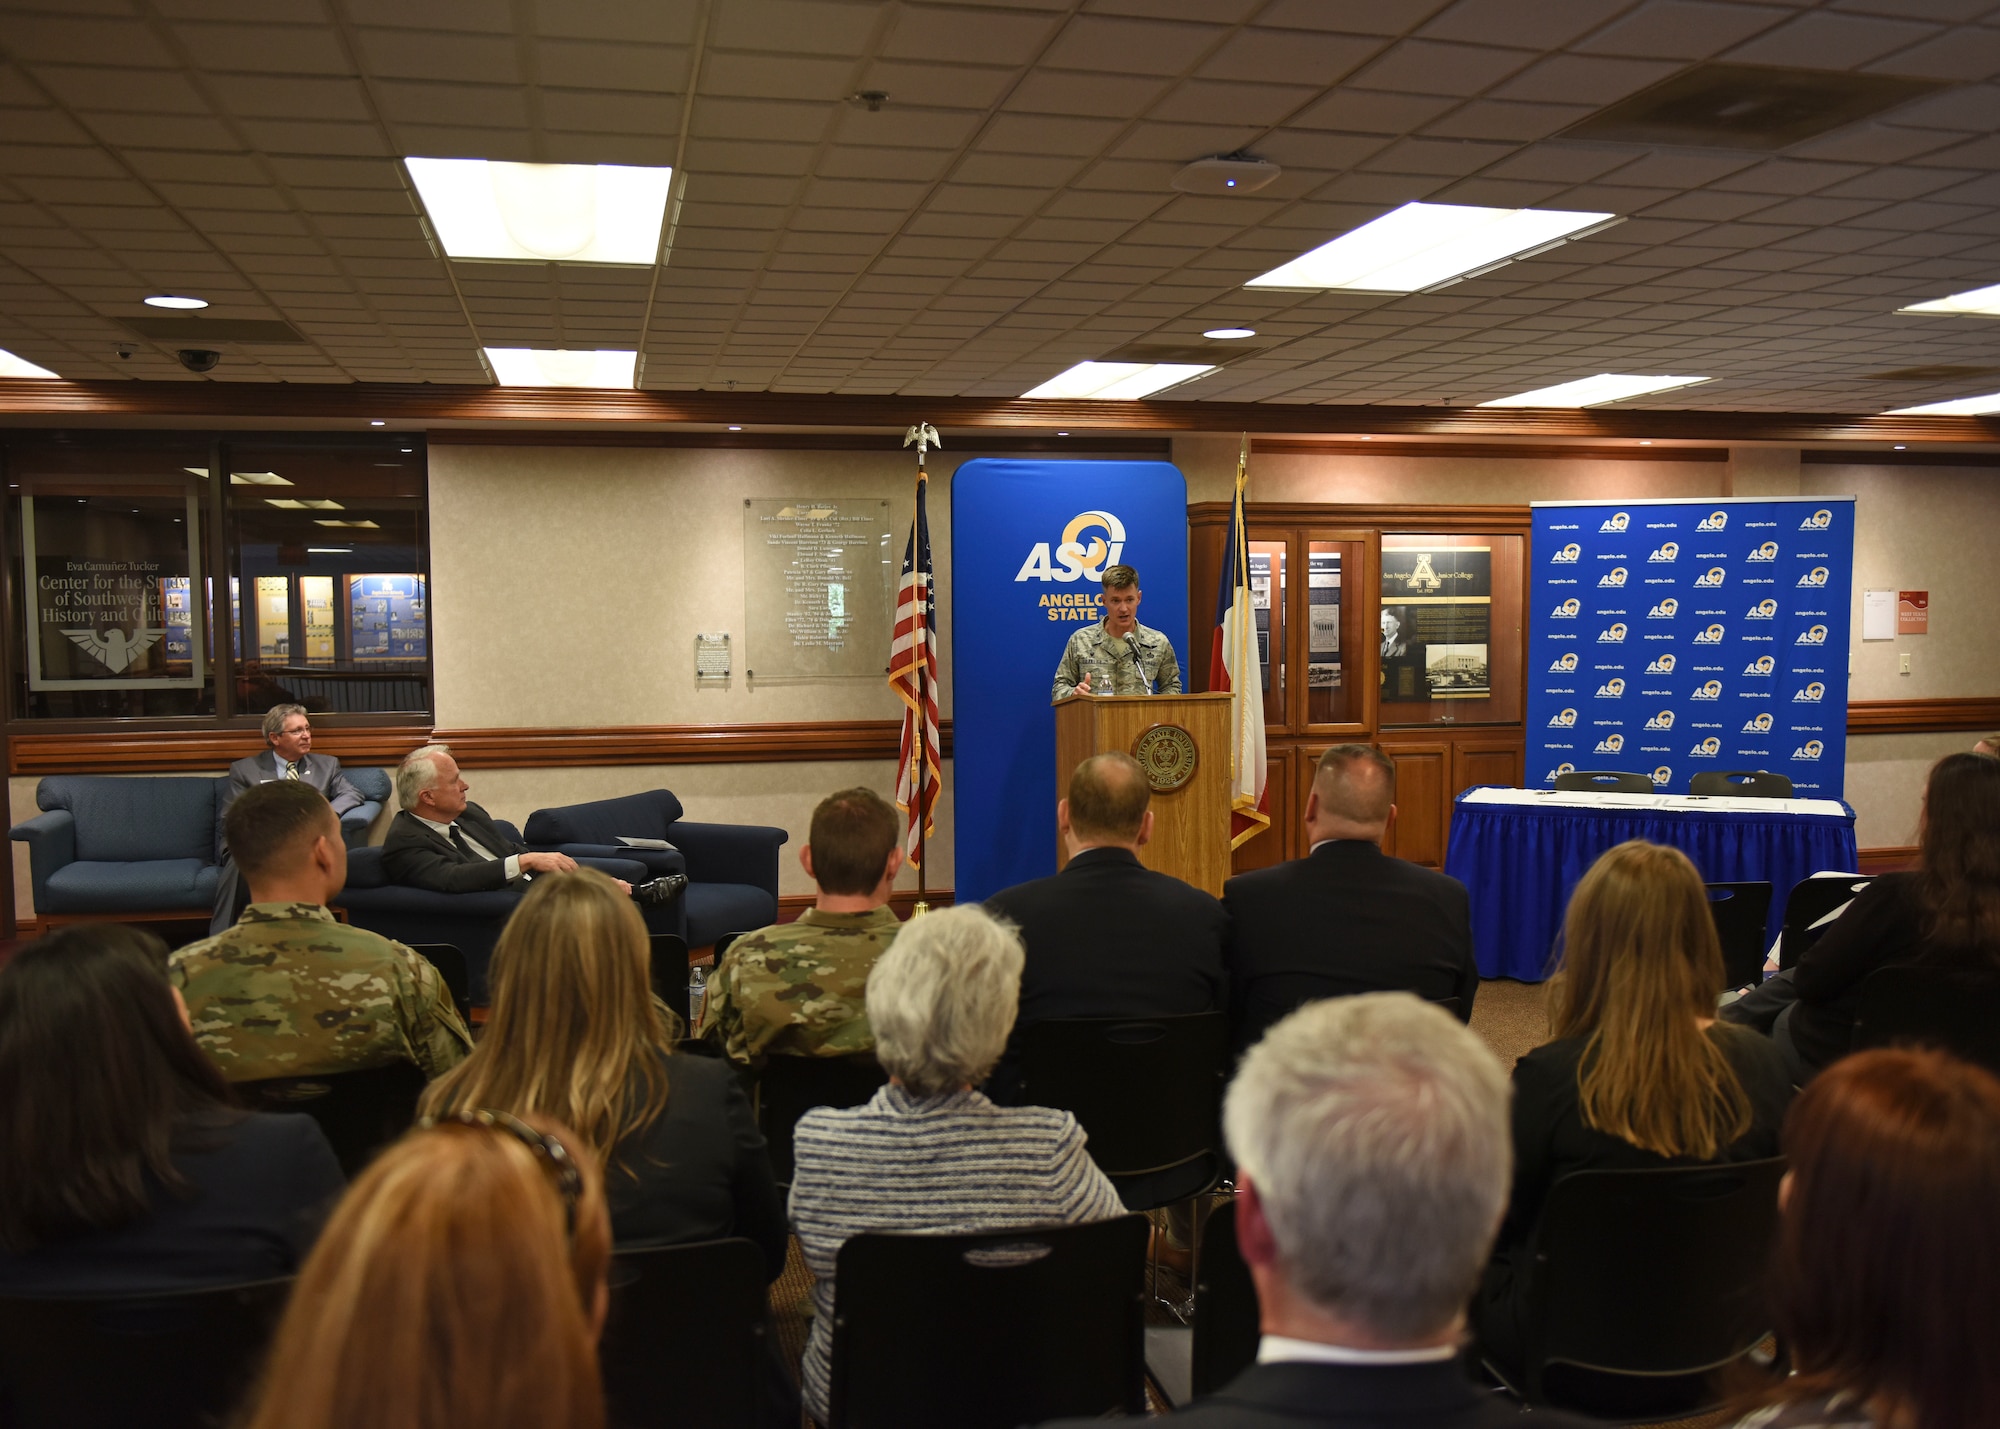 U.S. Air Force Col. Thomas Coakley, 17th Training Group commander, addresses those in attendance of the Memorandum of Understanding signing, which allows 14N professionals to transfer 12 credit hours toward two master’s degree through Angelo State University at ASU, Texas, April 15, 2019. Over 115 14N professionals have transferred credits from Goodfellow courses to one of the ASU’s programs and over 60 have completed their master’s degree. (U.S. Air Force photo by Airman 1st Class Zachary Chapman/Released)